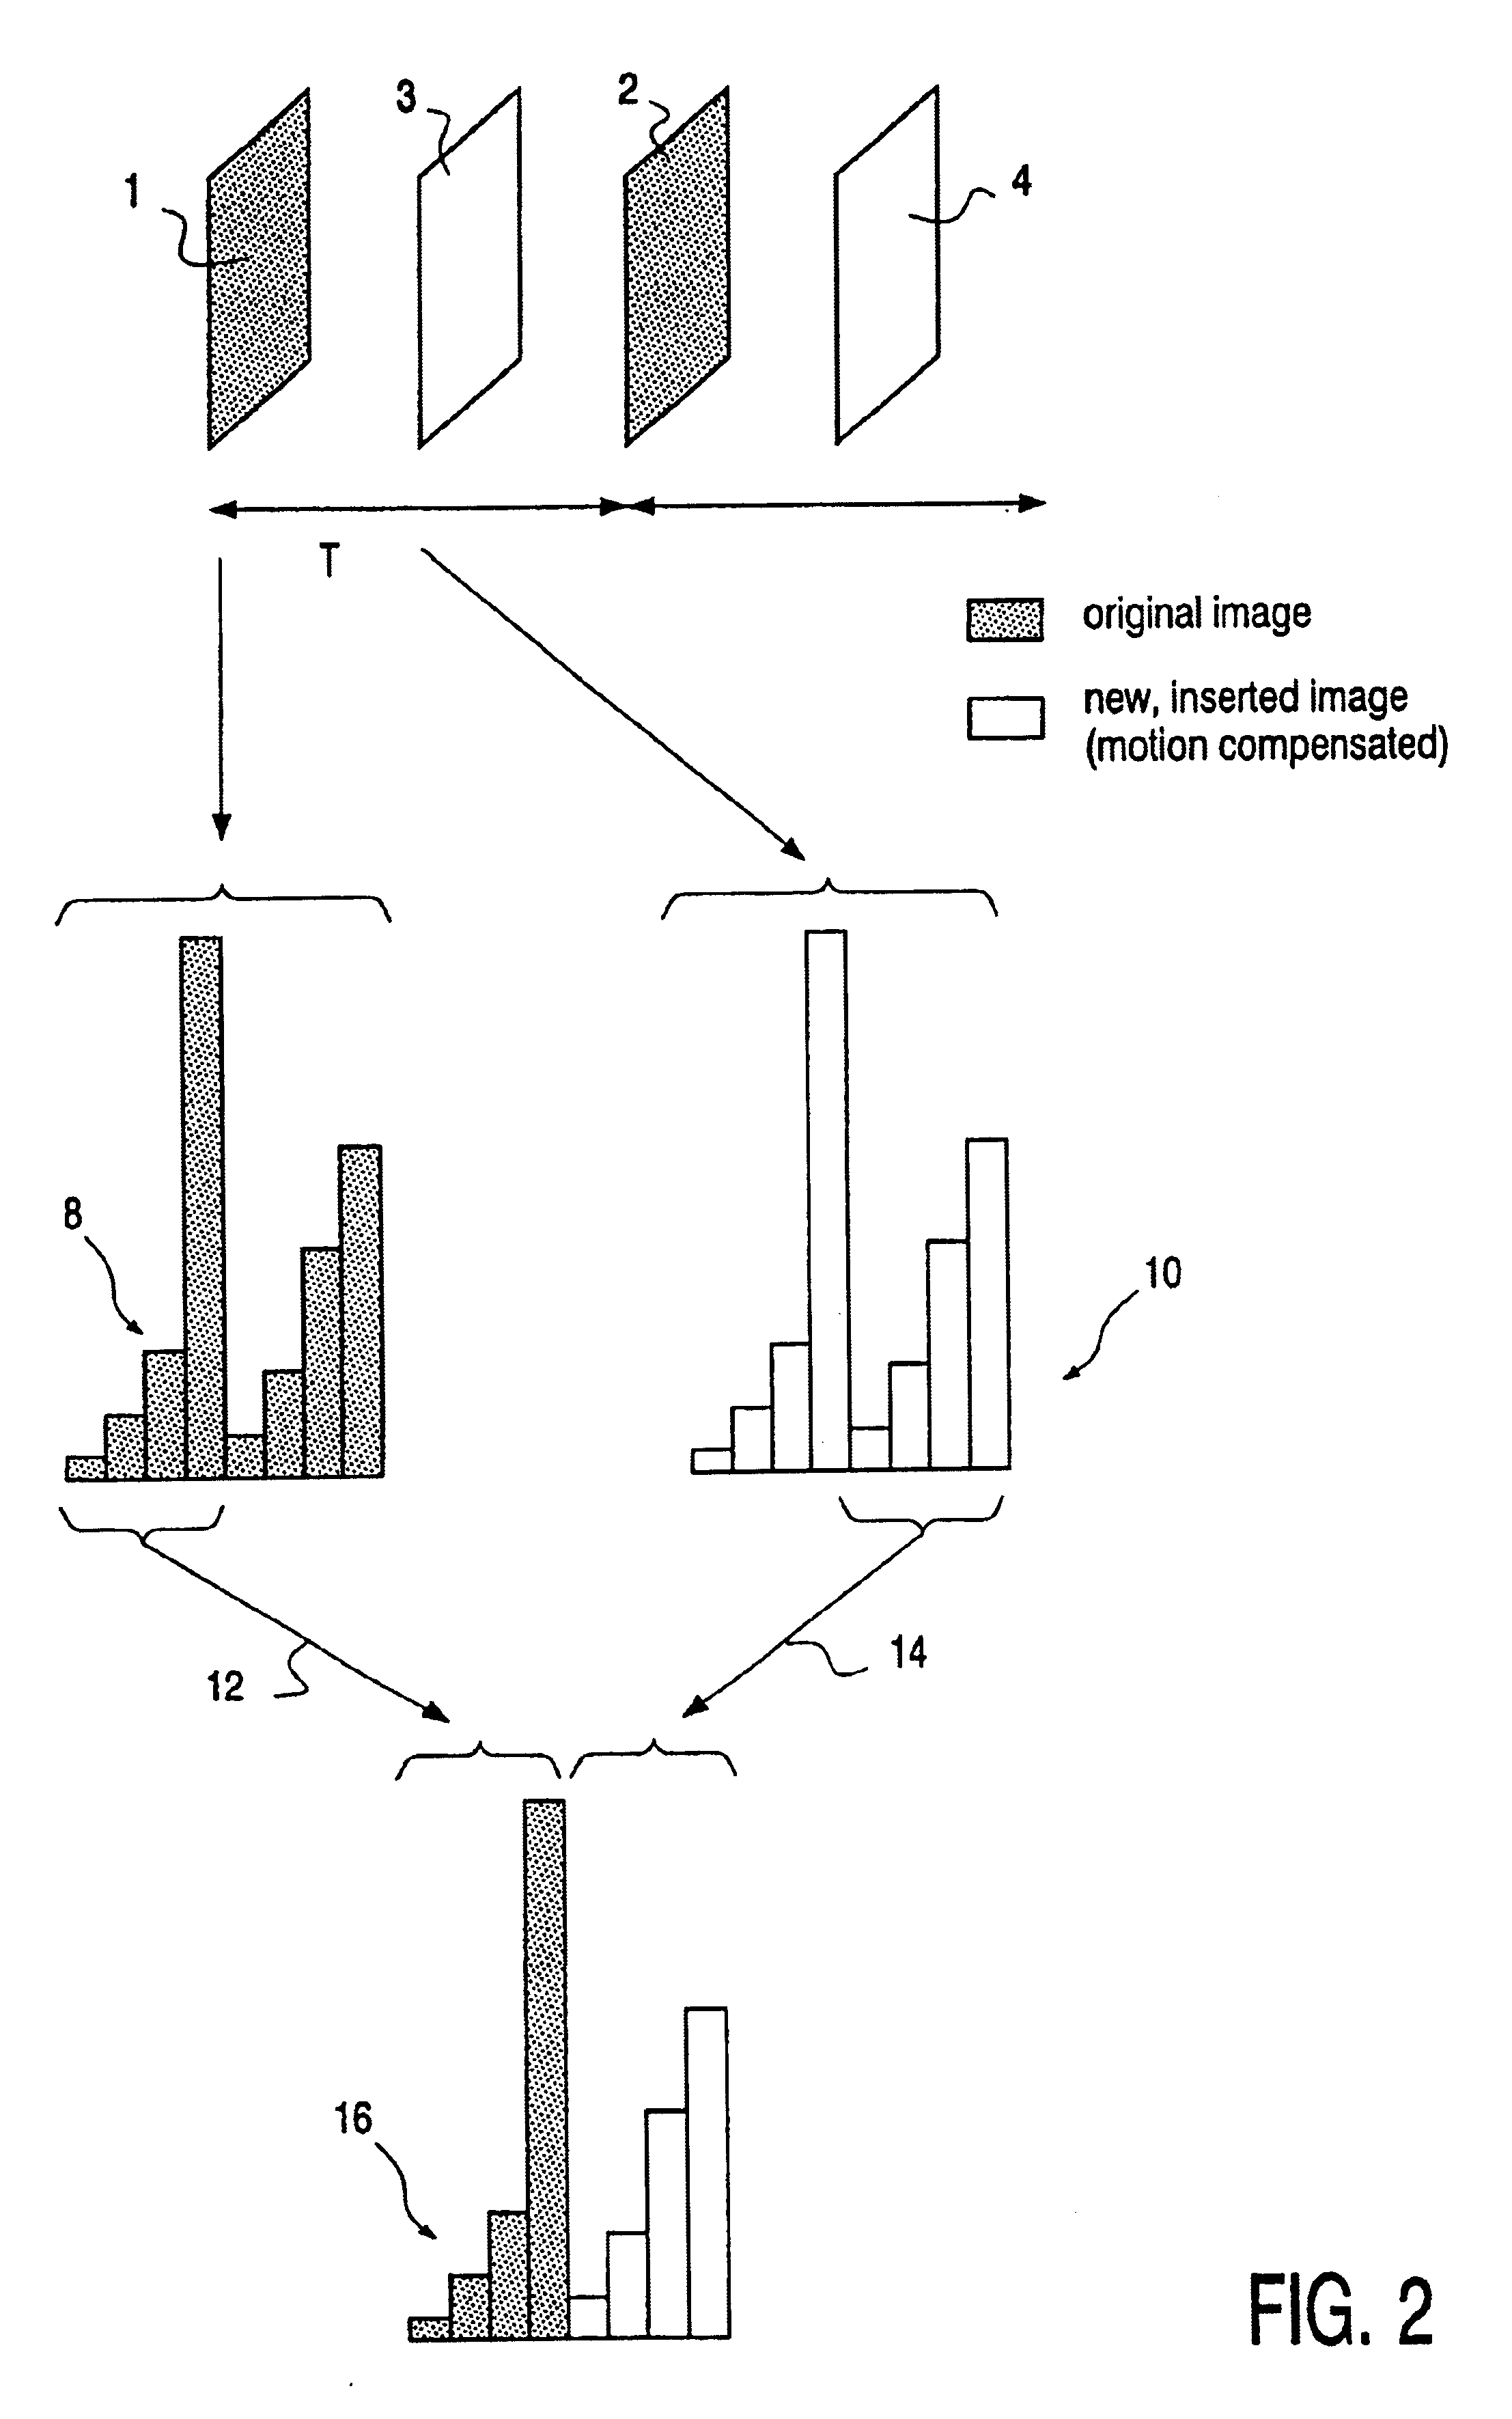 Motion compensated upconversion for plasma displays